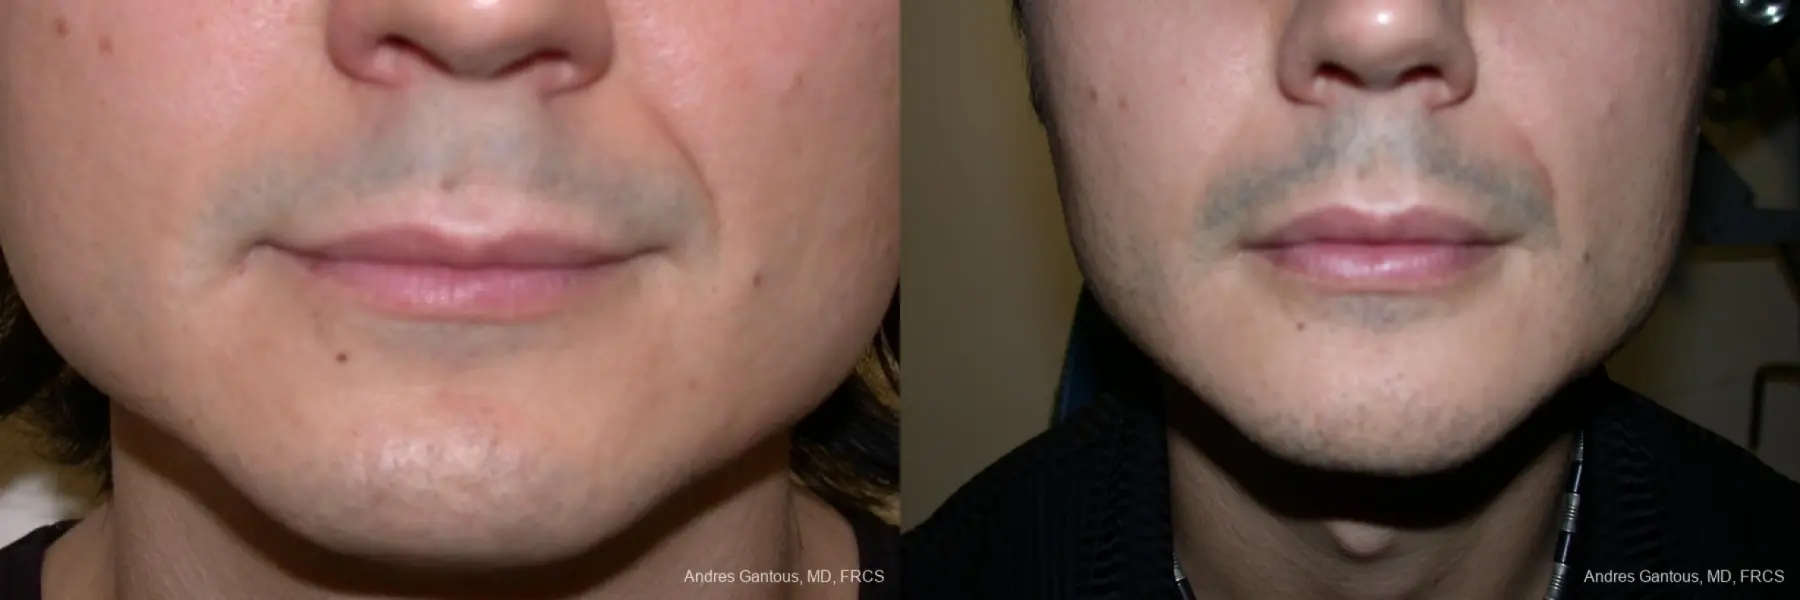 Chin Augmentation: Patient 1 - Before and After 1